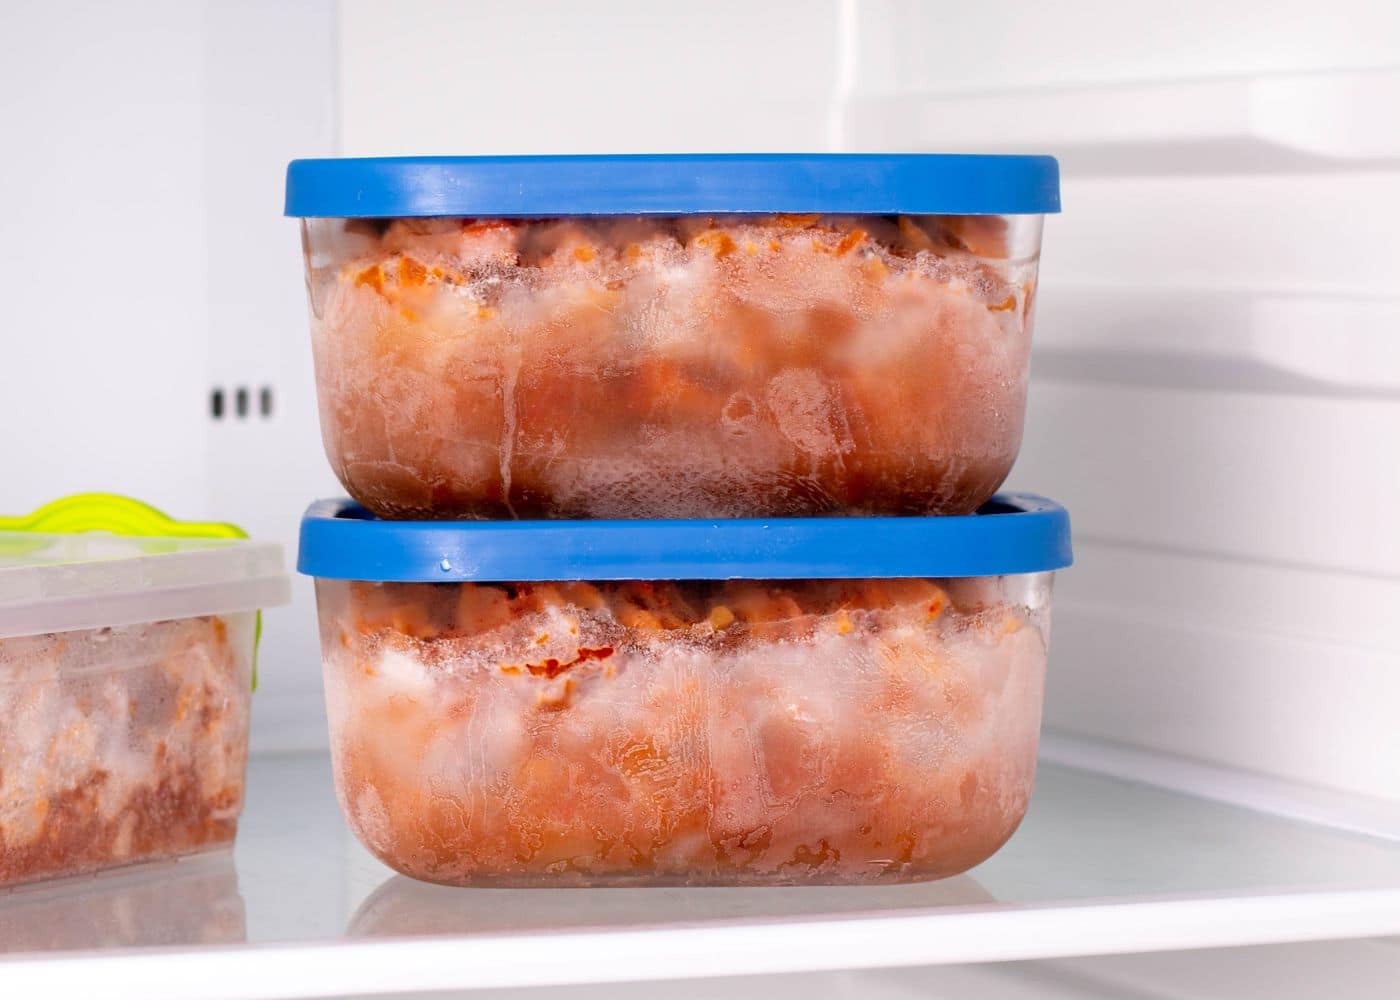 How Long Does Frozen Meat Last? How to Safely Store Meat